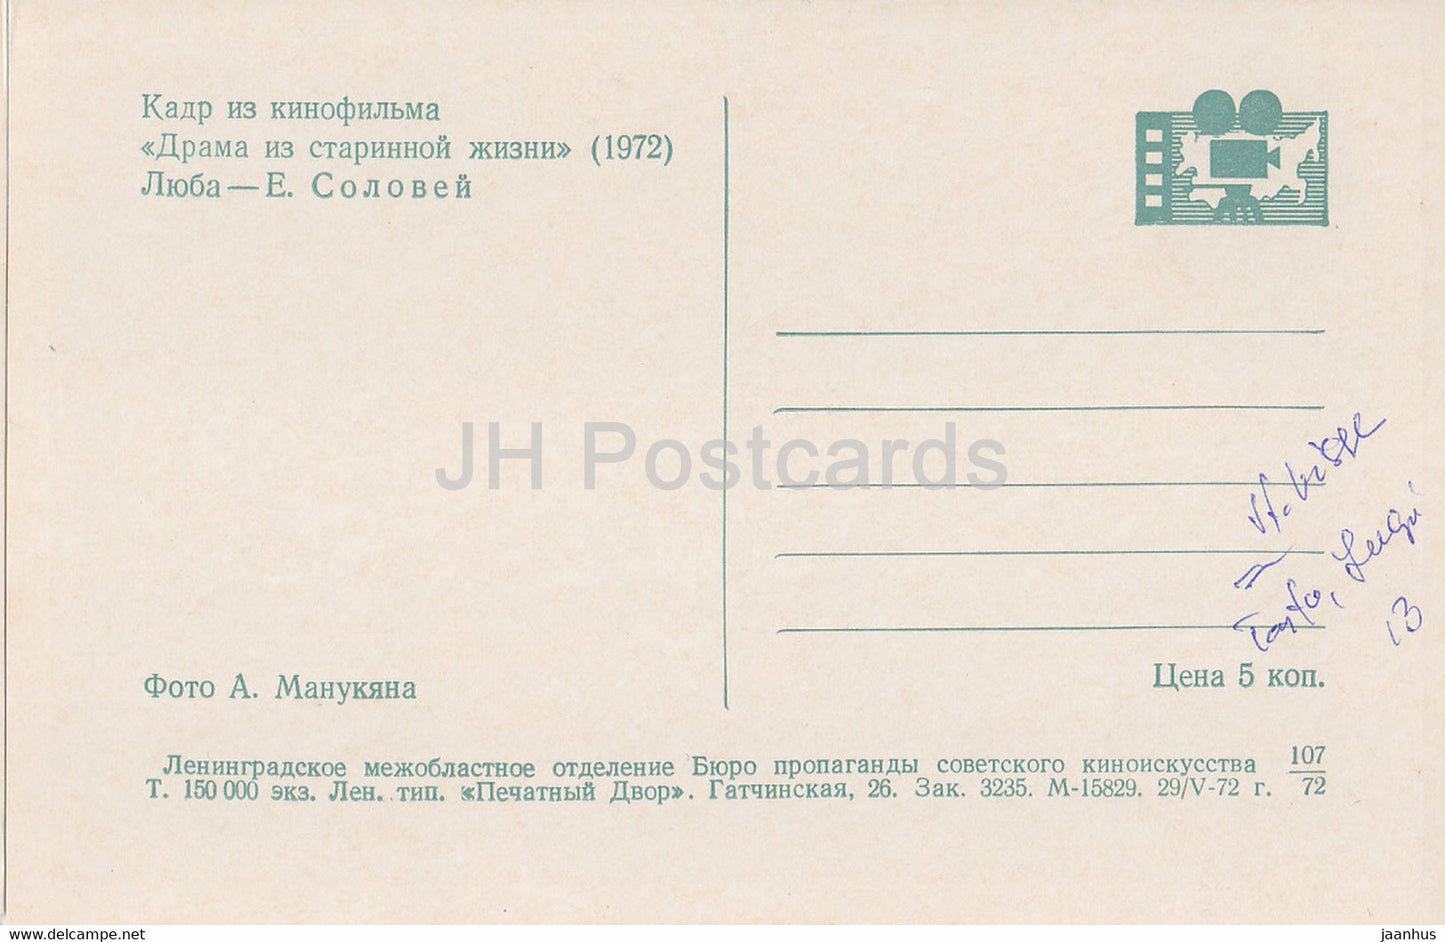 Drama from Ancient Life - actress E. Solovey - Movie - Film - soviet - 1972 - Russia USSR - unused